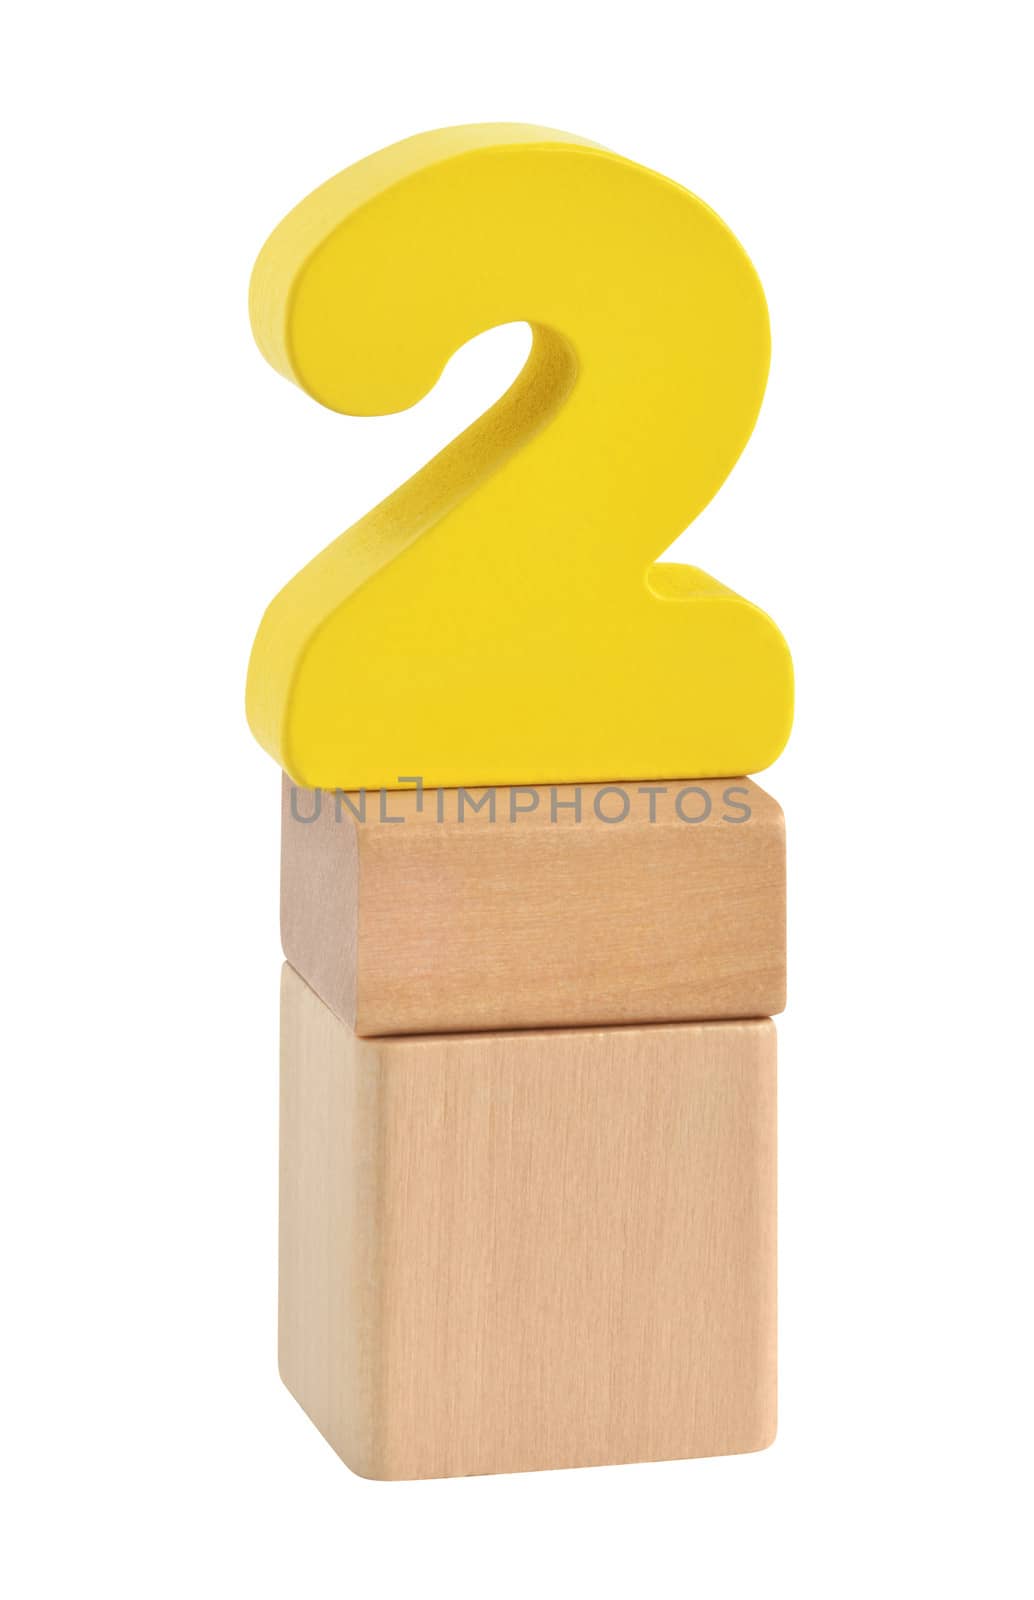 Number two made of wooden blocks toy. Isolated on white background with path.